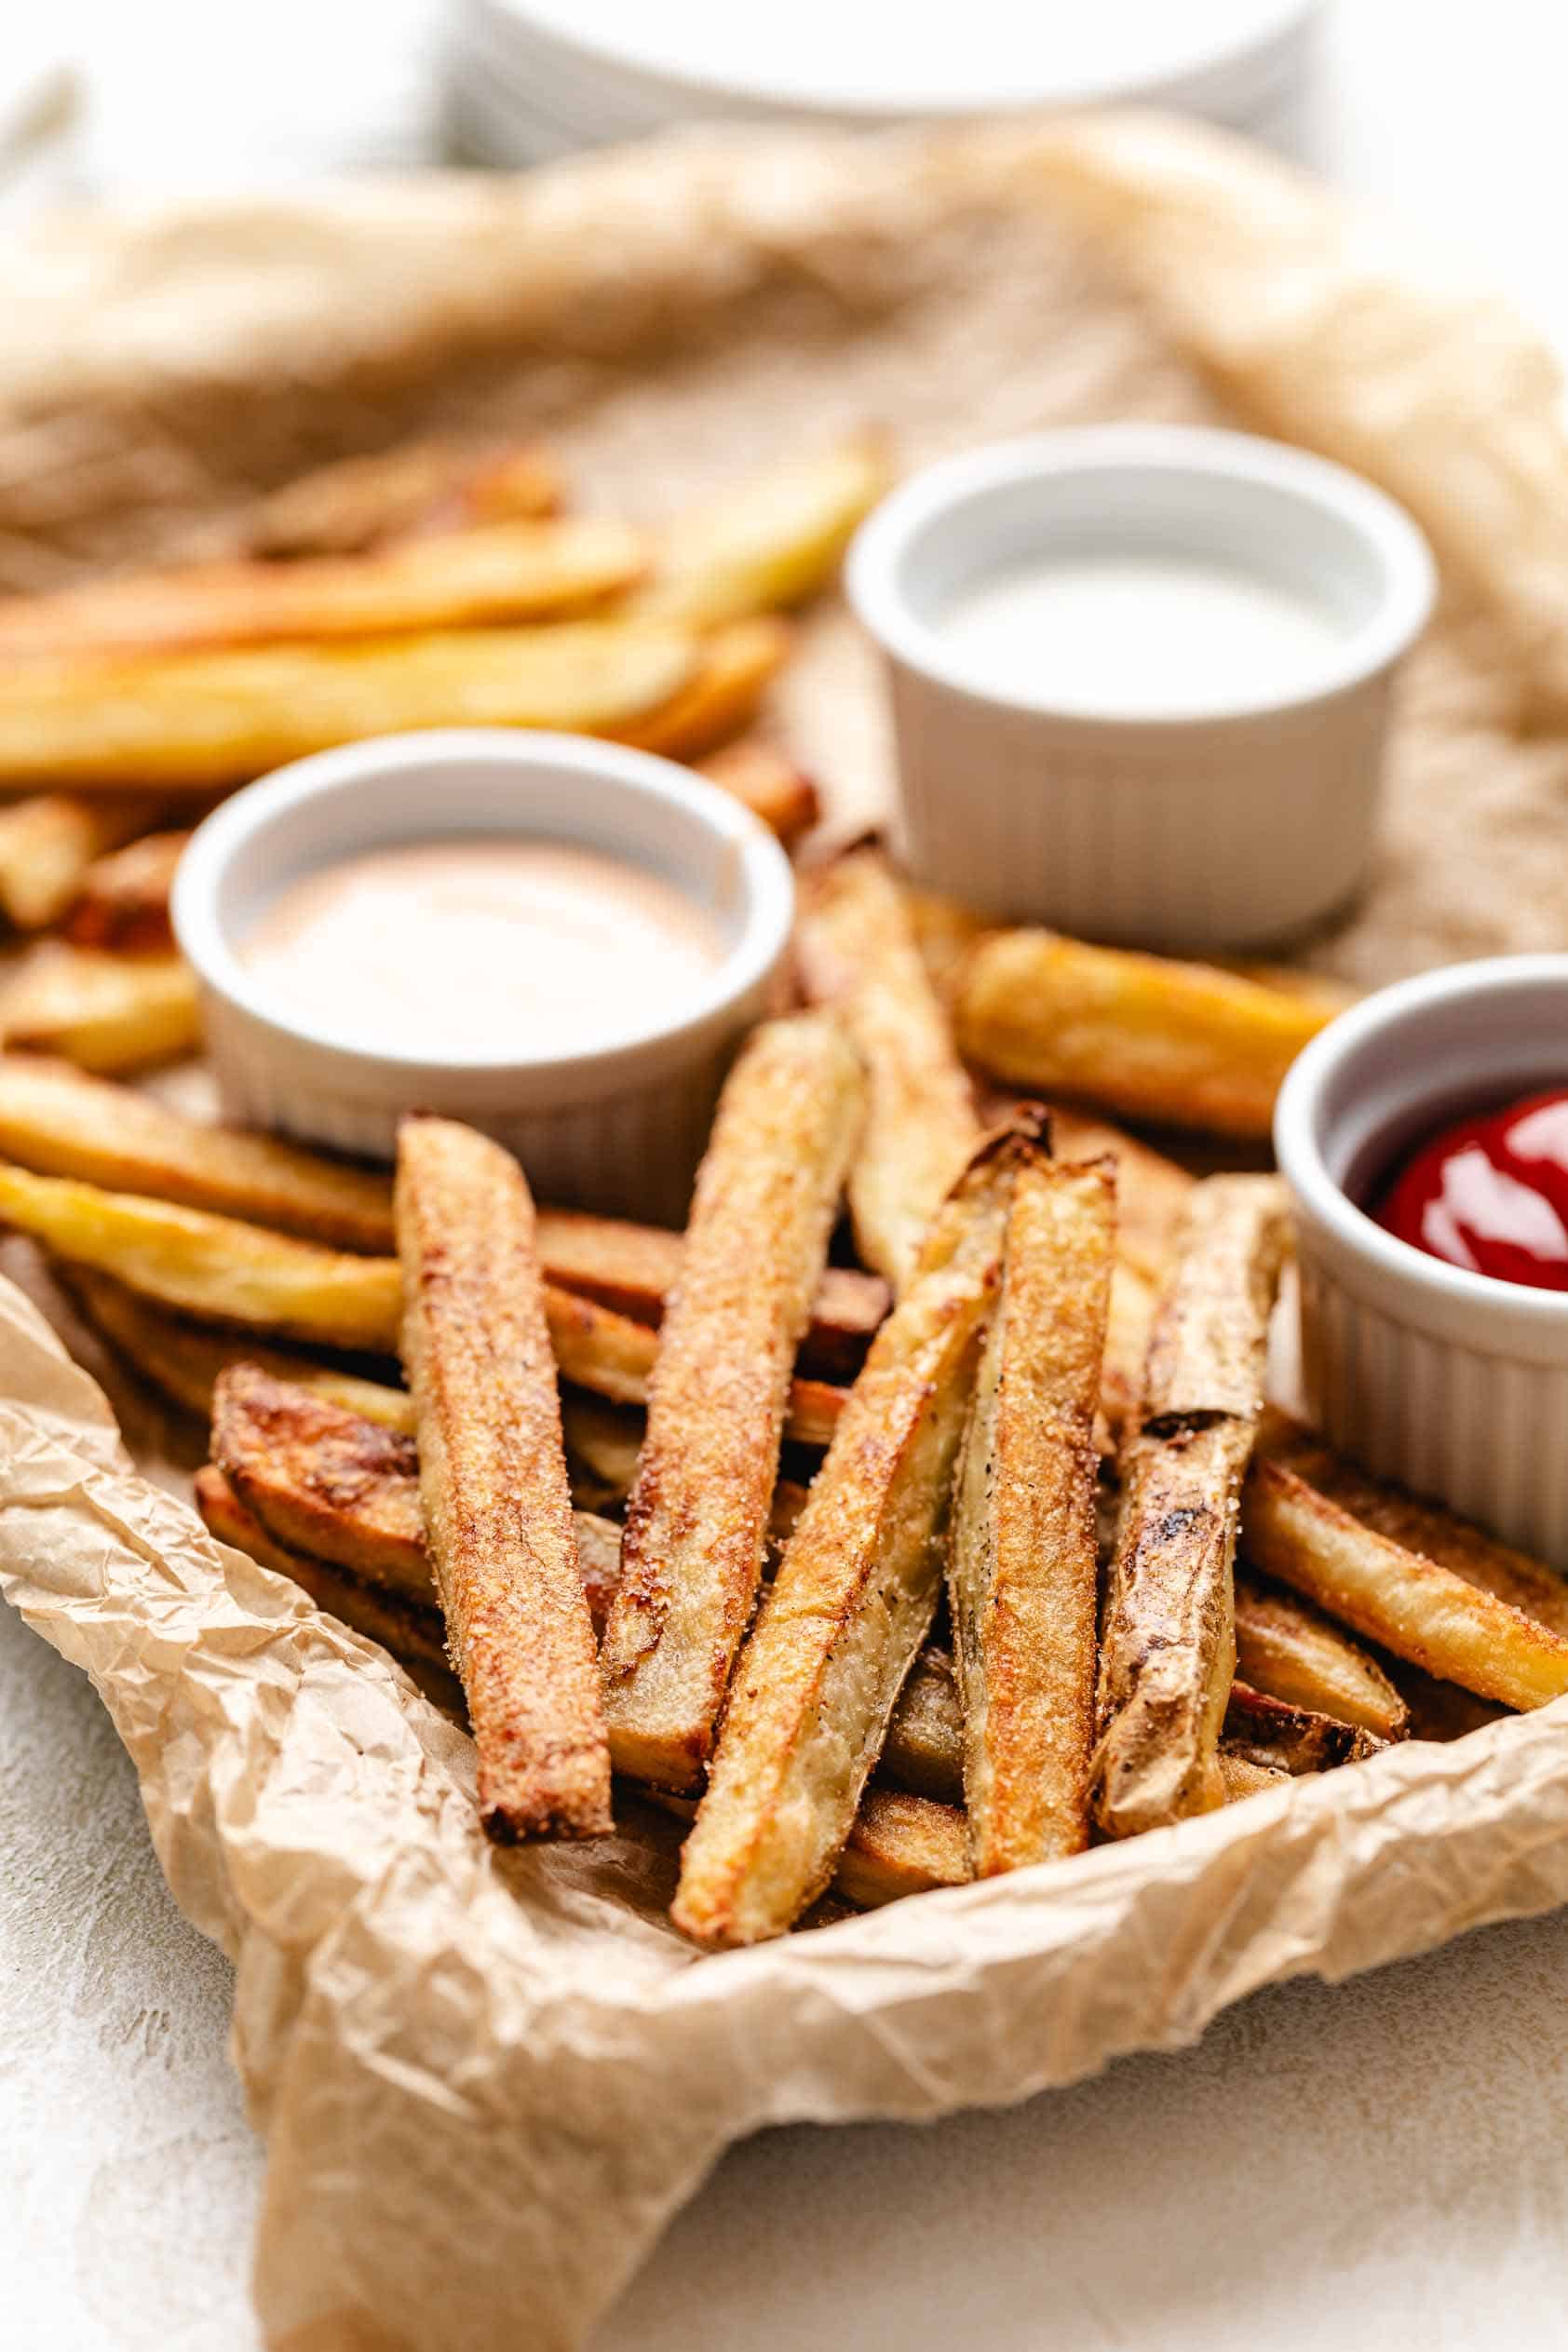 French fries on parchment paper.